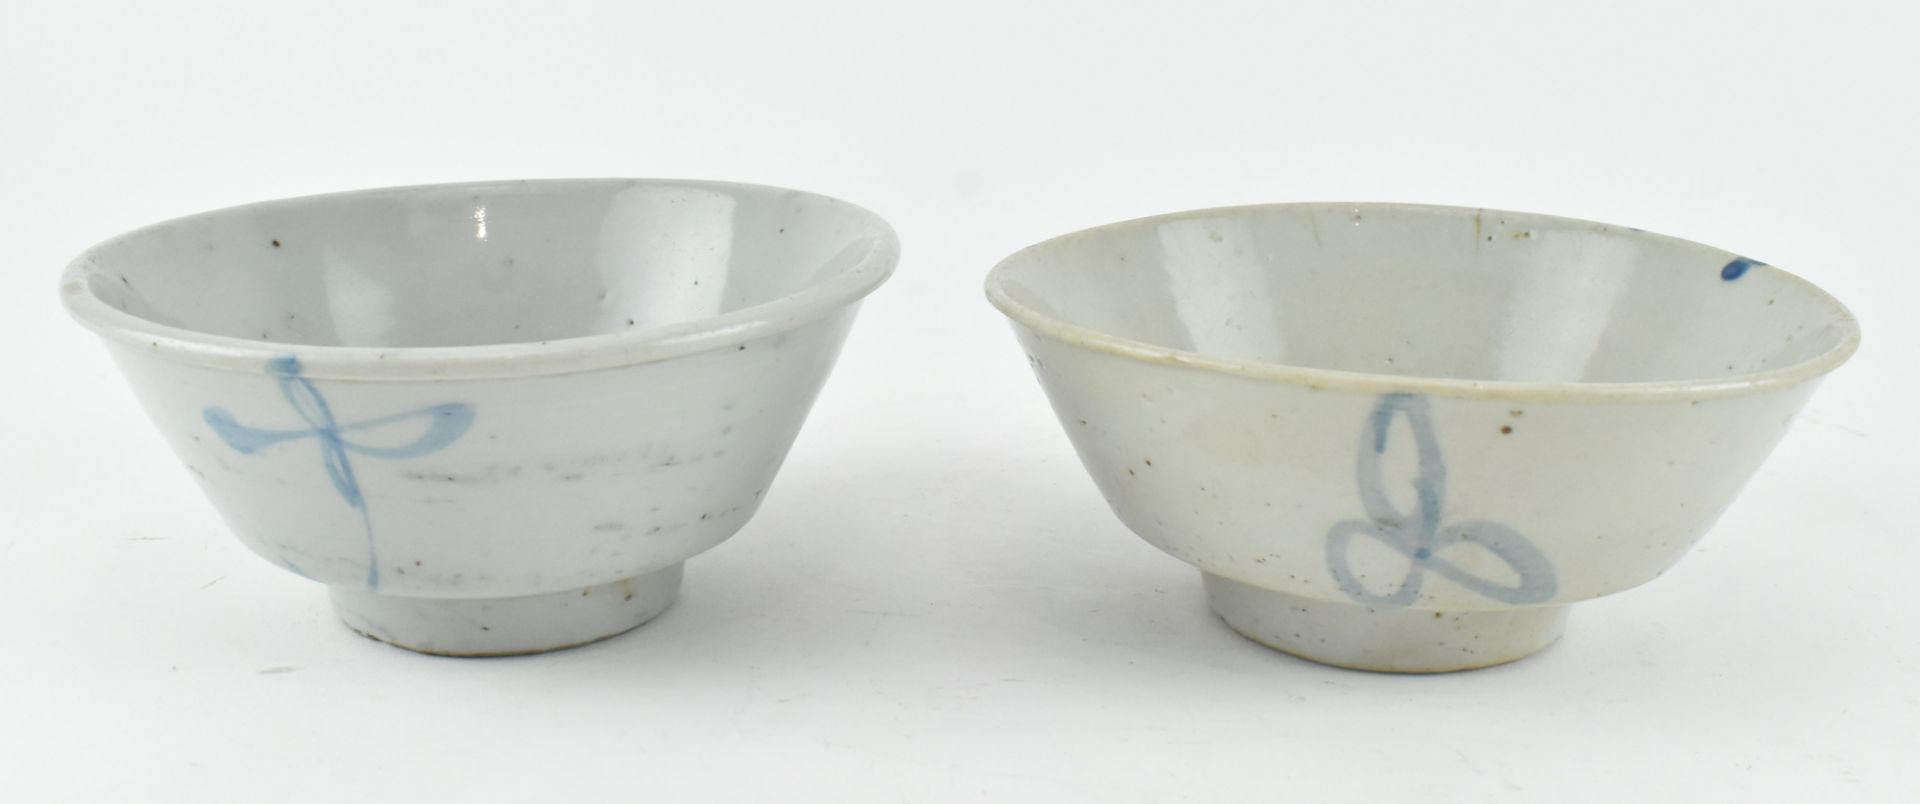 TWO ZHANGZHOU SWATOW WARE BLUE AND WHITE BOWLS 汕头碗两个 - Image 3 of 7